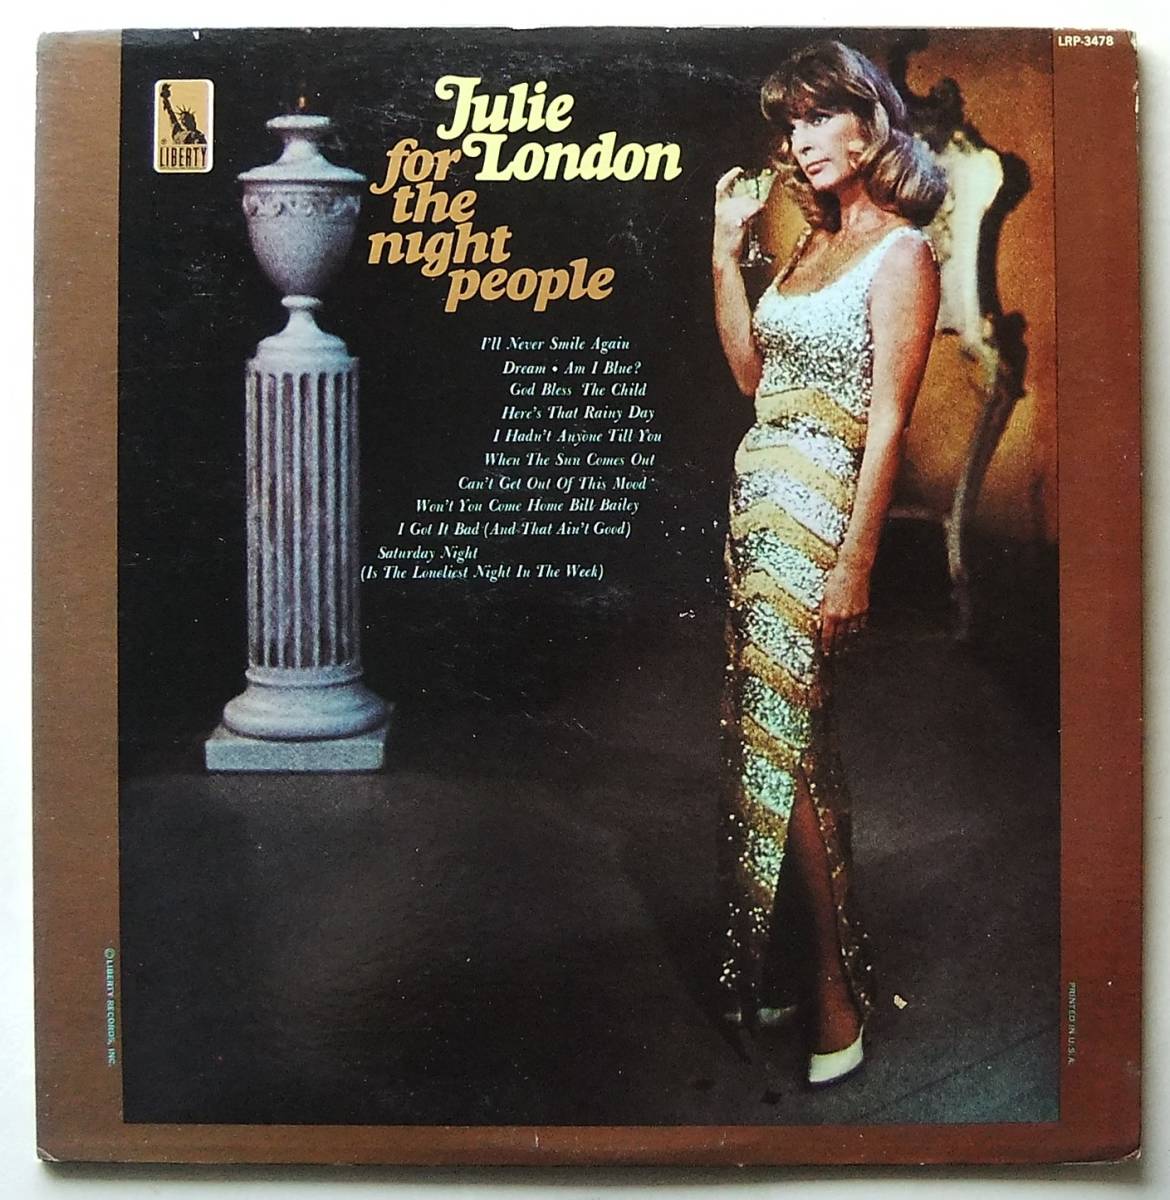 ◆ JULIE LONDON / For The Night People ◆ Liberty LRP 3478 (promo:color) ◆_画像1